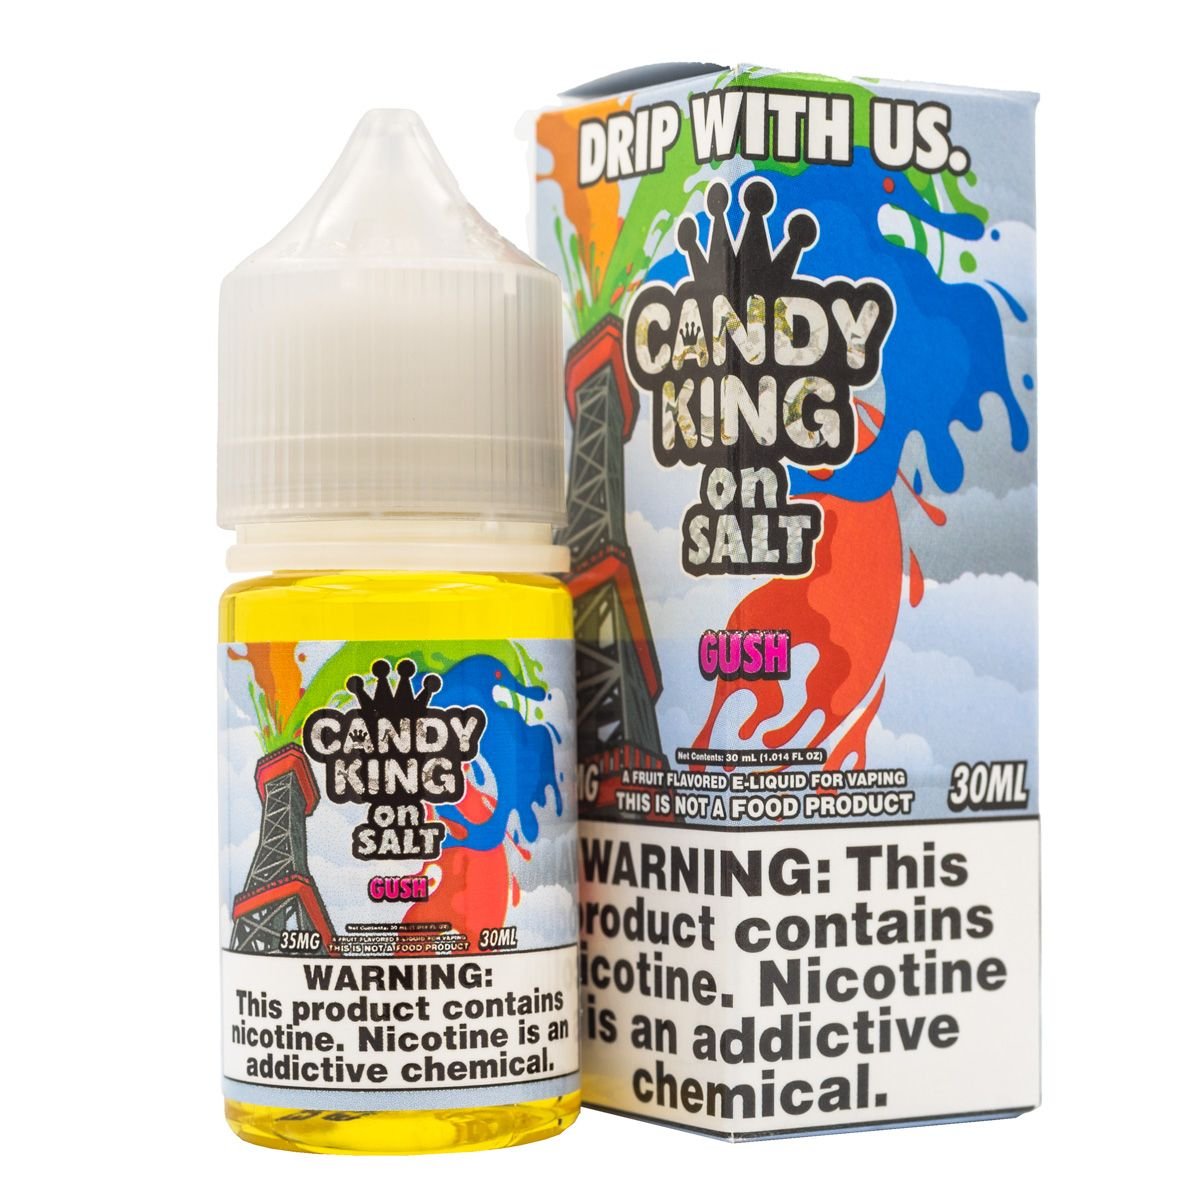 CANDY KING - GUSH - 30ML - EJUICEOVERSTOCK.COM